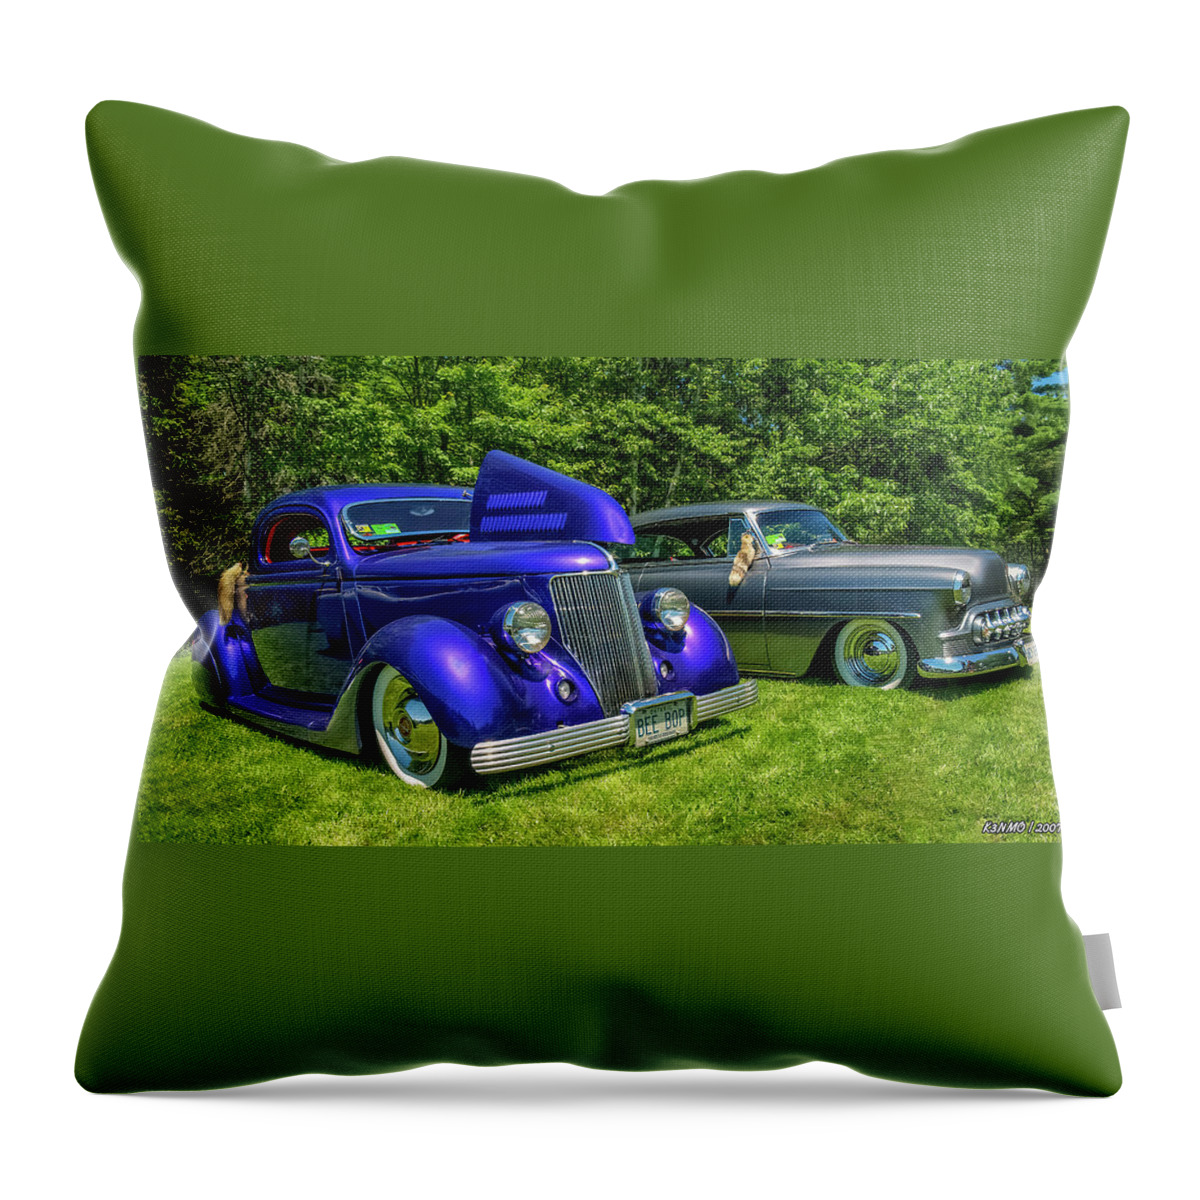 1936 Throw Pillow featuring the digital art Mild Customs 1936 Ford and 1953 Chevy by Ken Morris